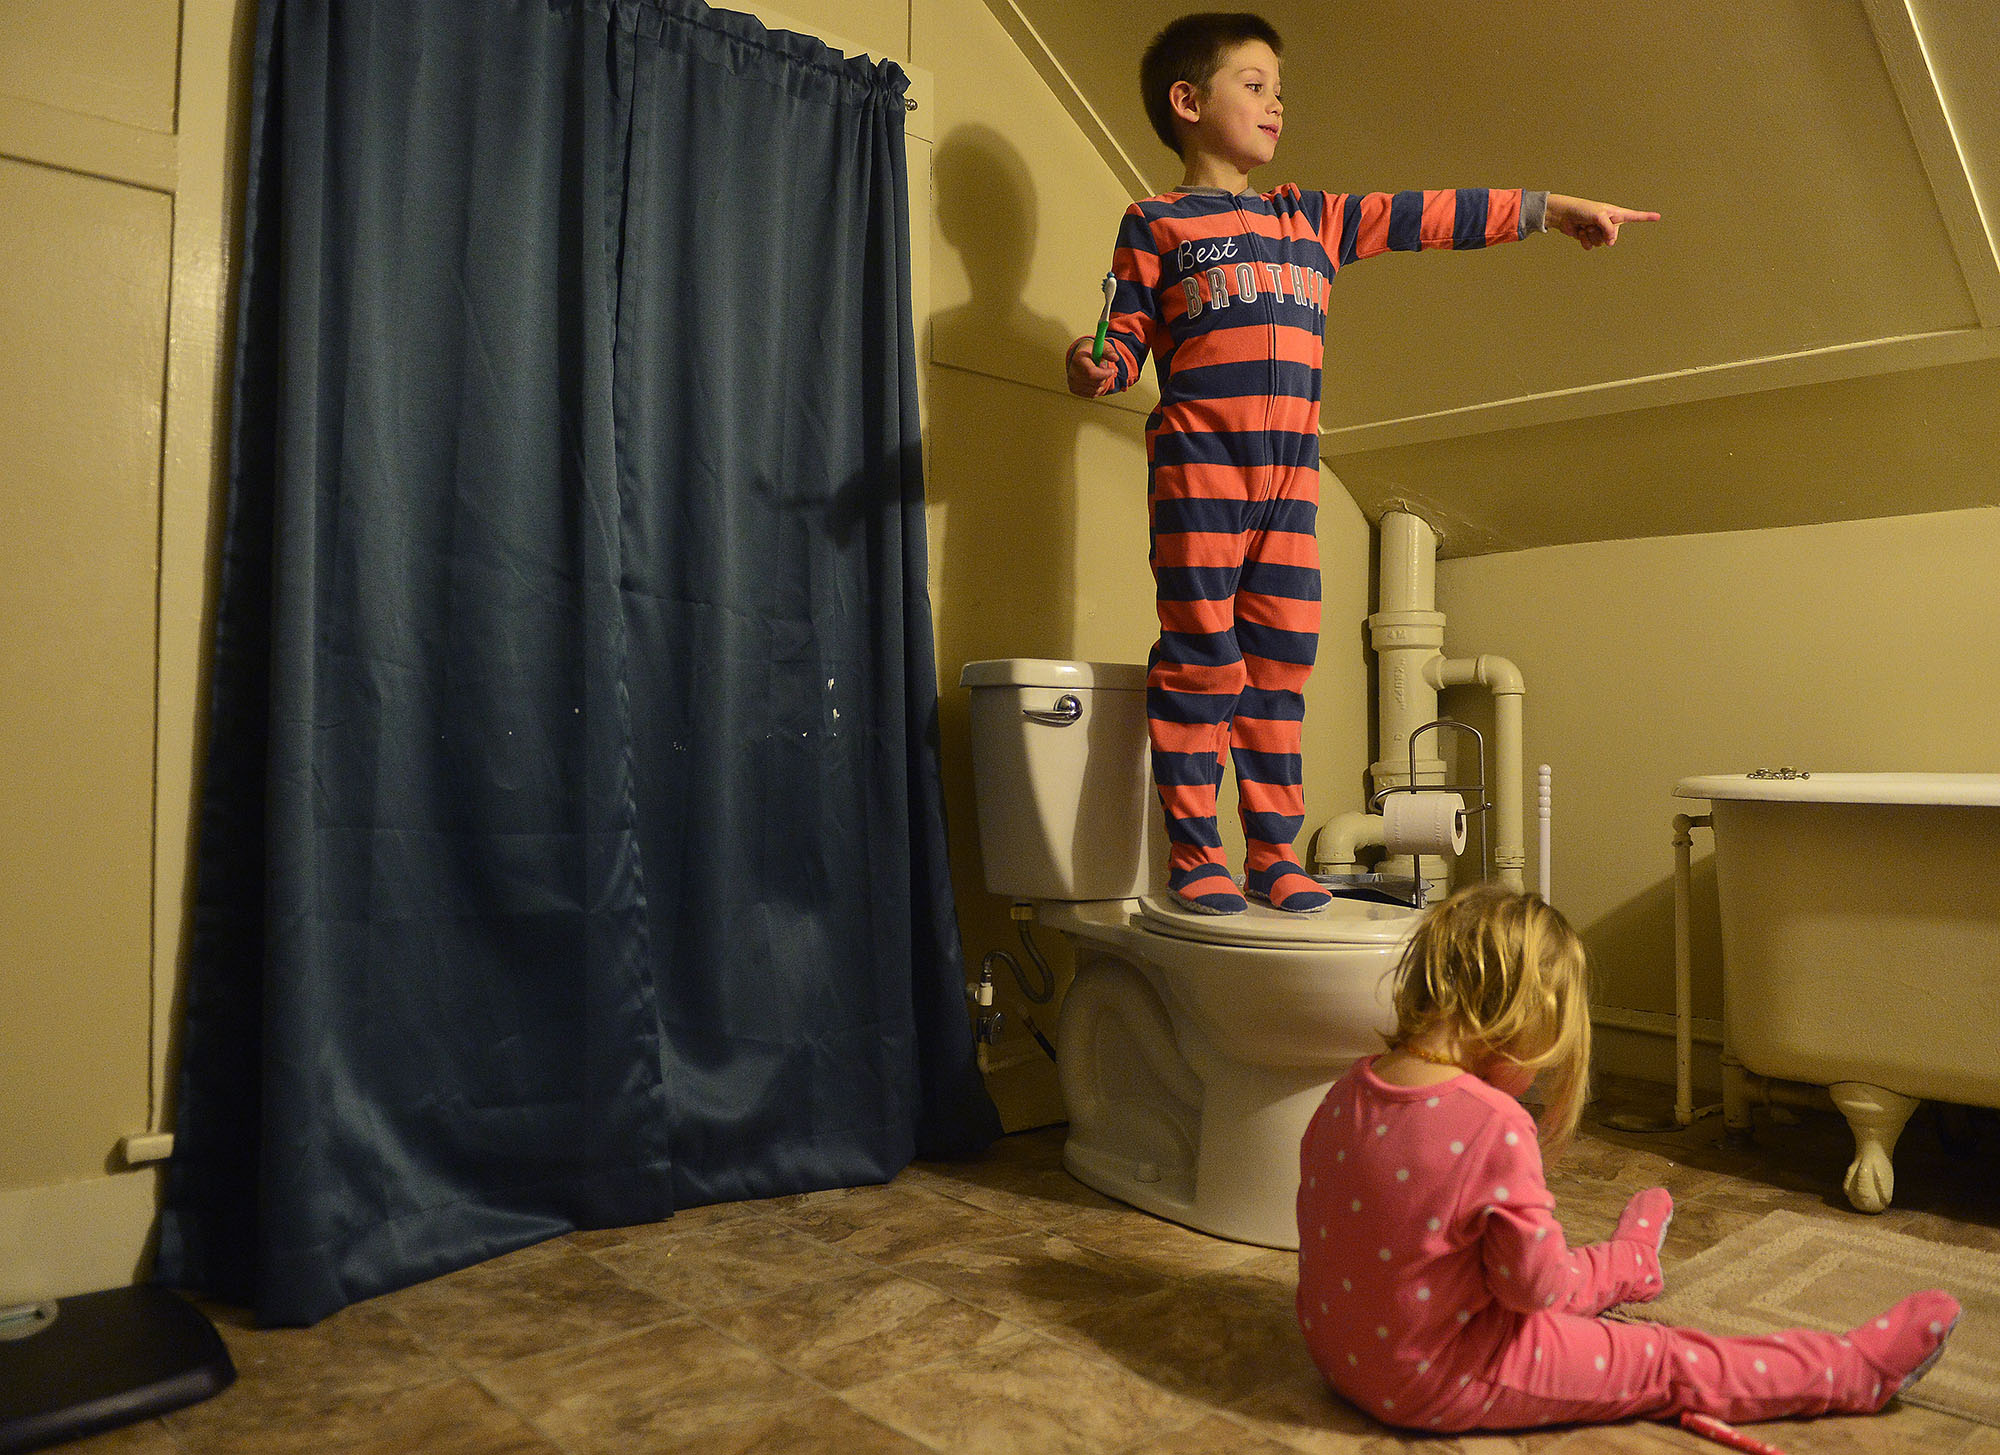  Colton stands on the toilet to brush his teeth while Hadley sits on the floor and tries to get toothpaste out of the tube as they get ready for bed on Thursday, Jan. 18 at their home in Groton. "I'm ready for this to be a two parent household again,